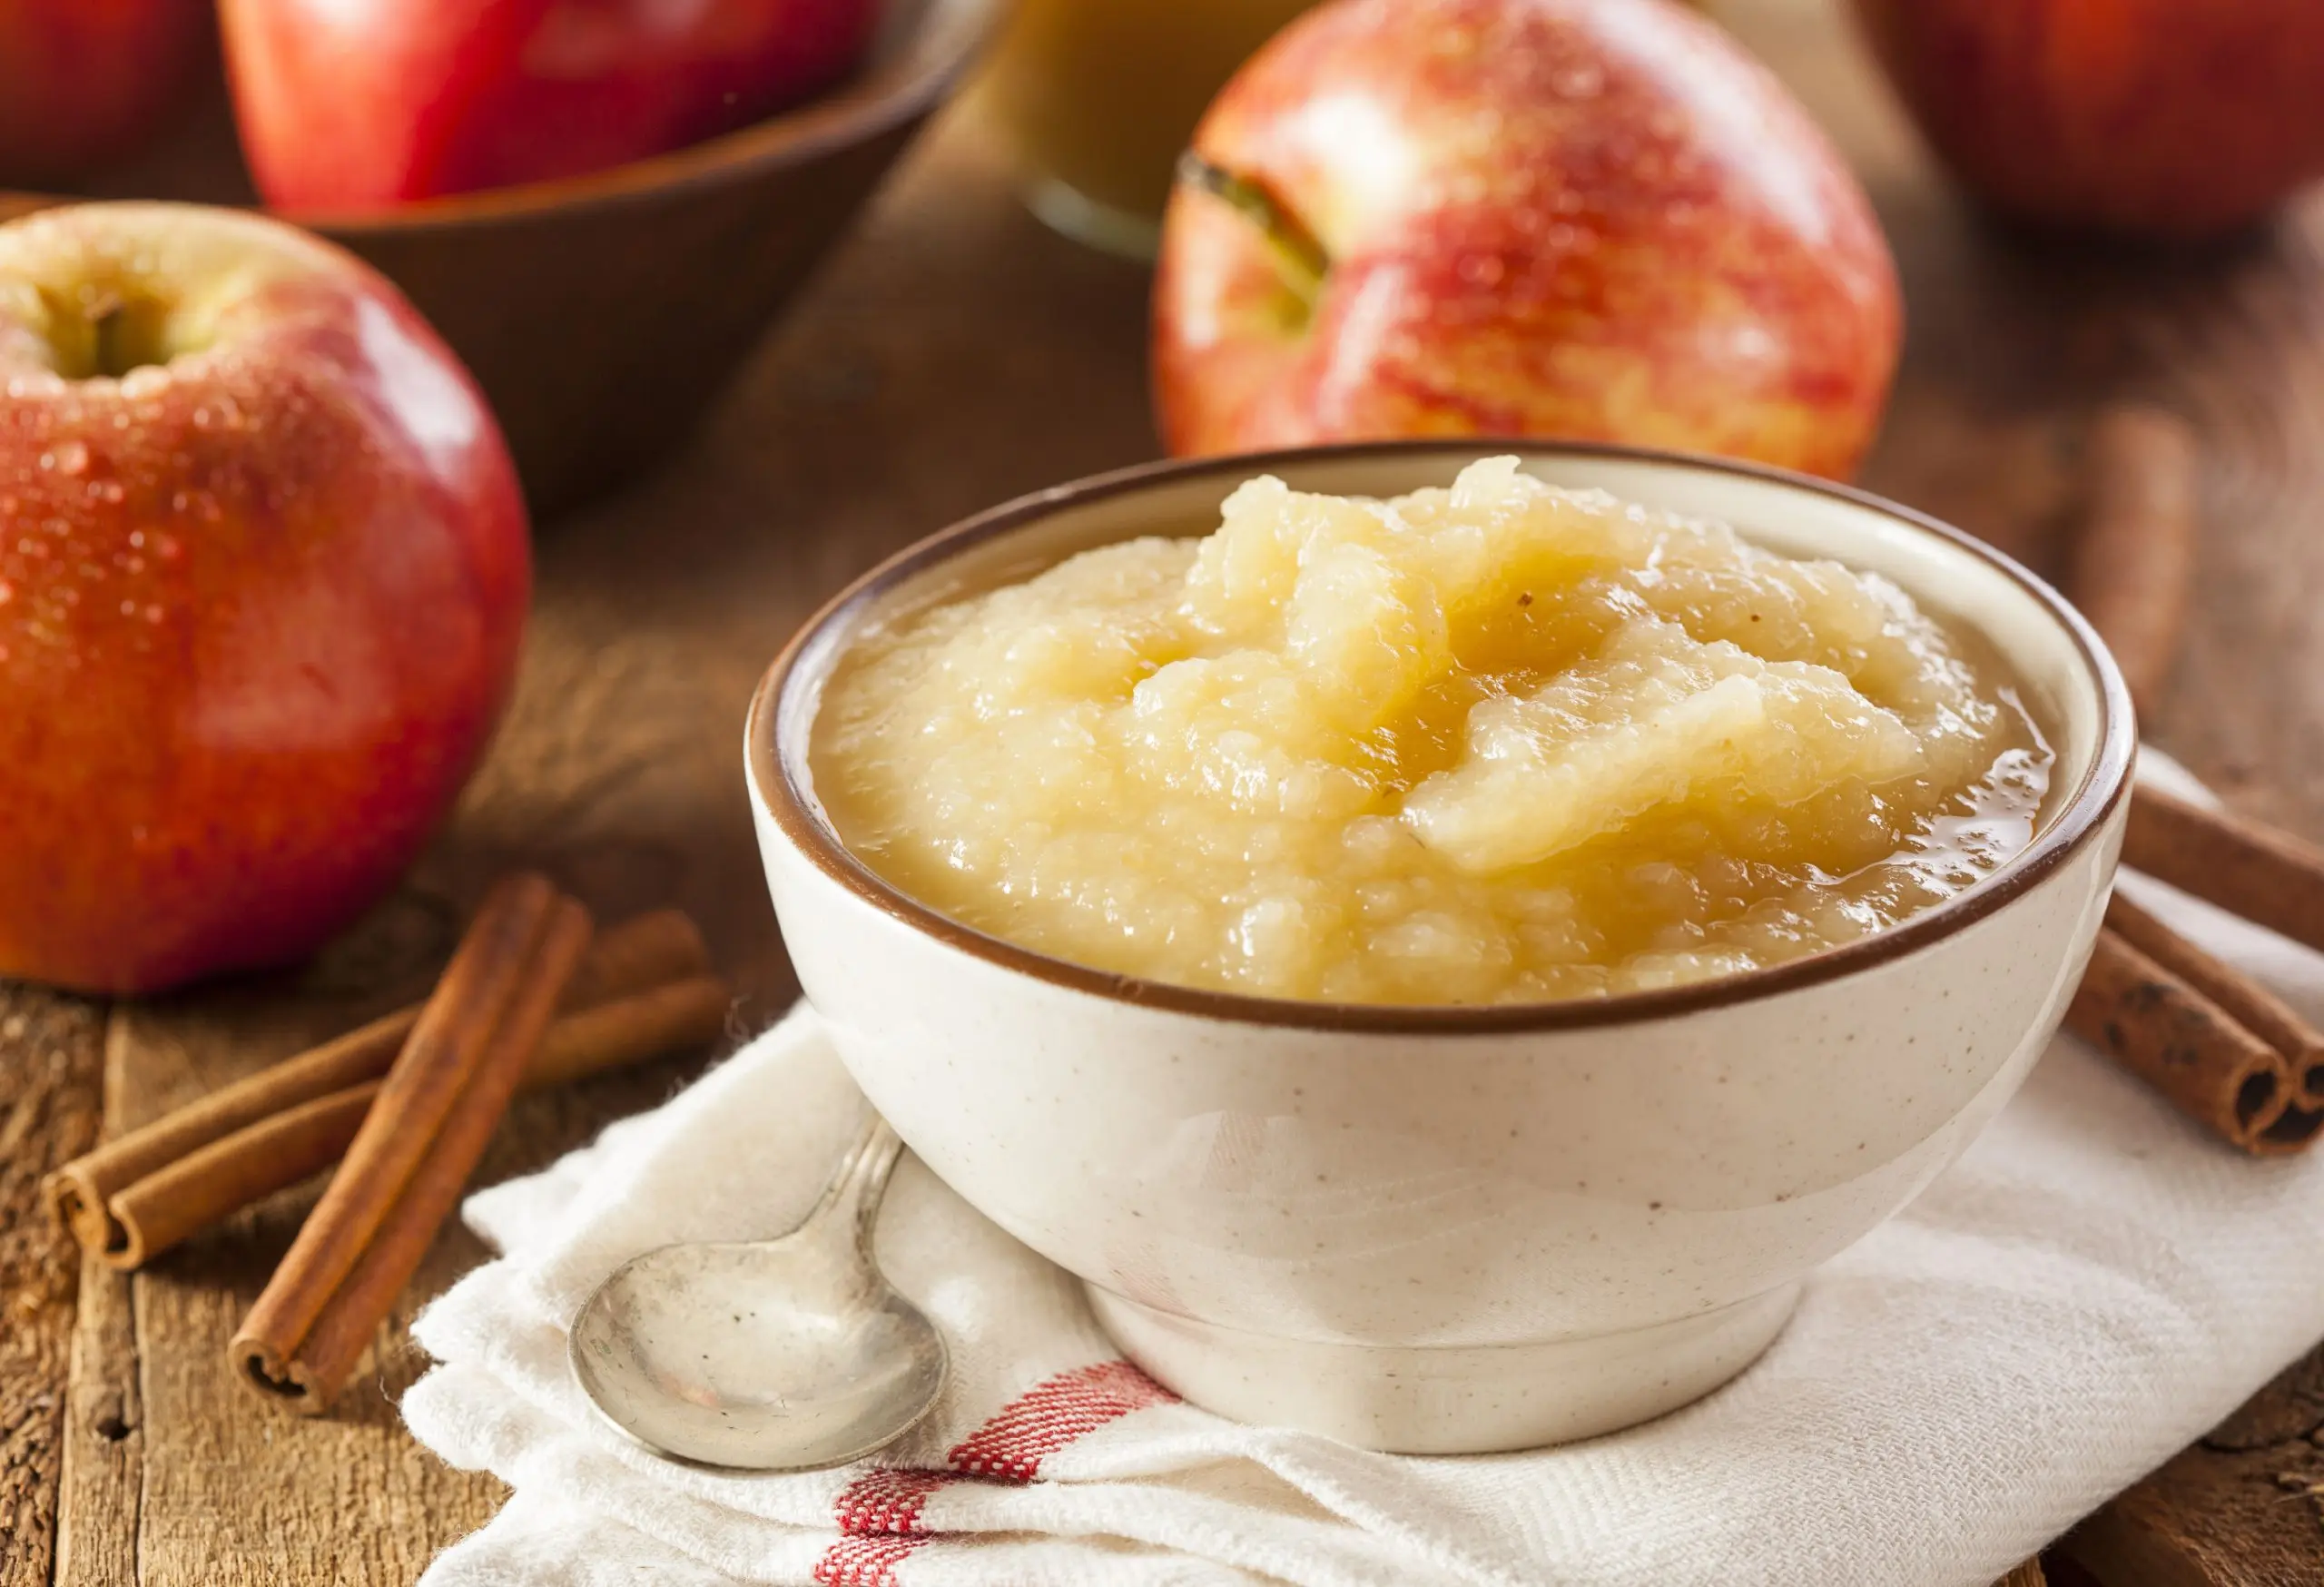 smoked apple sauce - Which apples make the best sauce